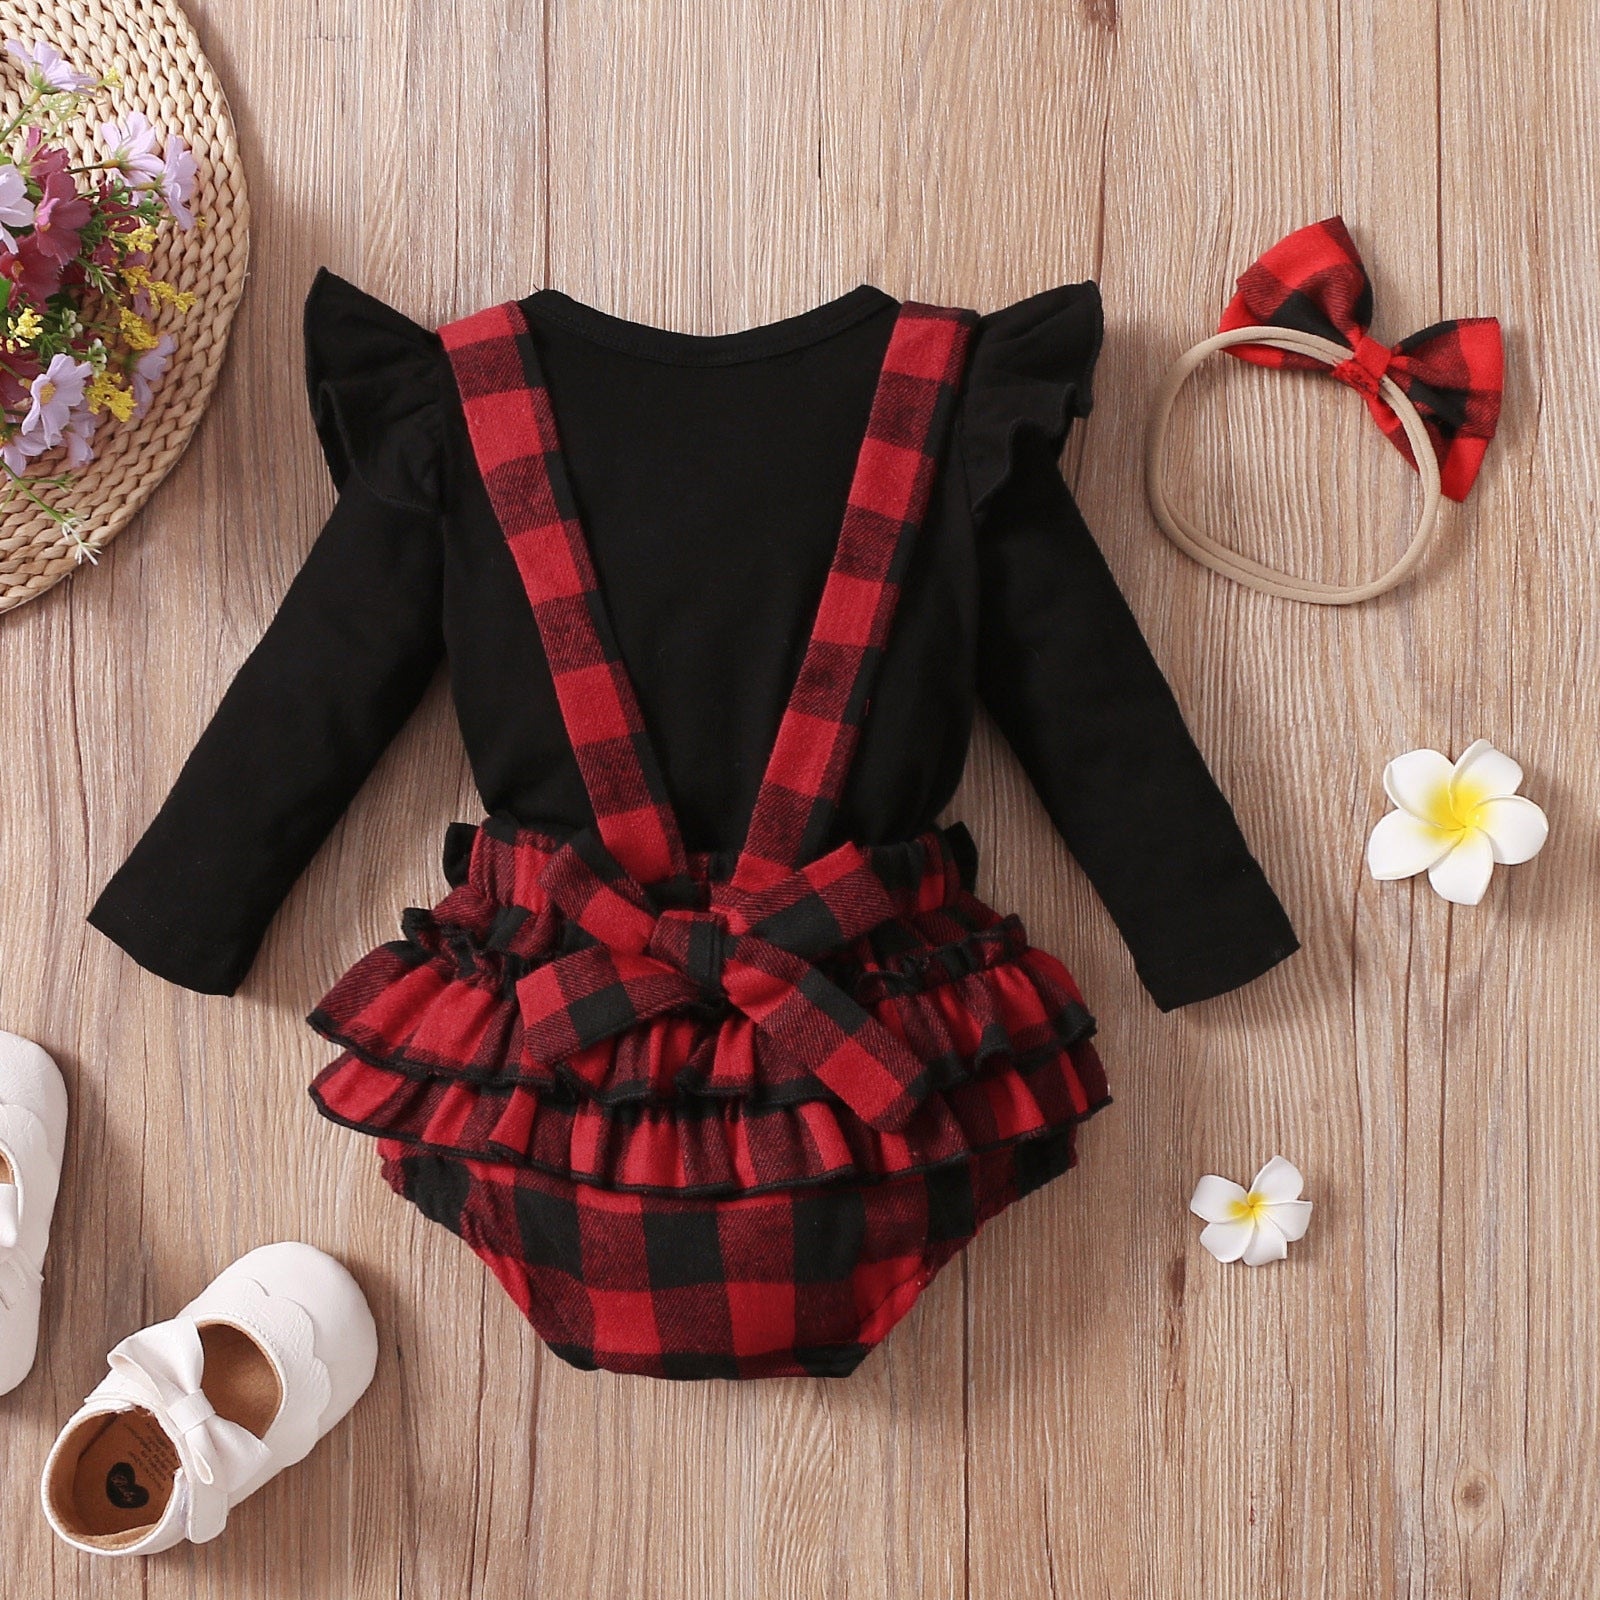 3PCS Infant Baby Girl Fall/Winter Solid Long Sleeve Tops+Plaid Printed Ruffles Suspender outfit